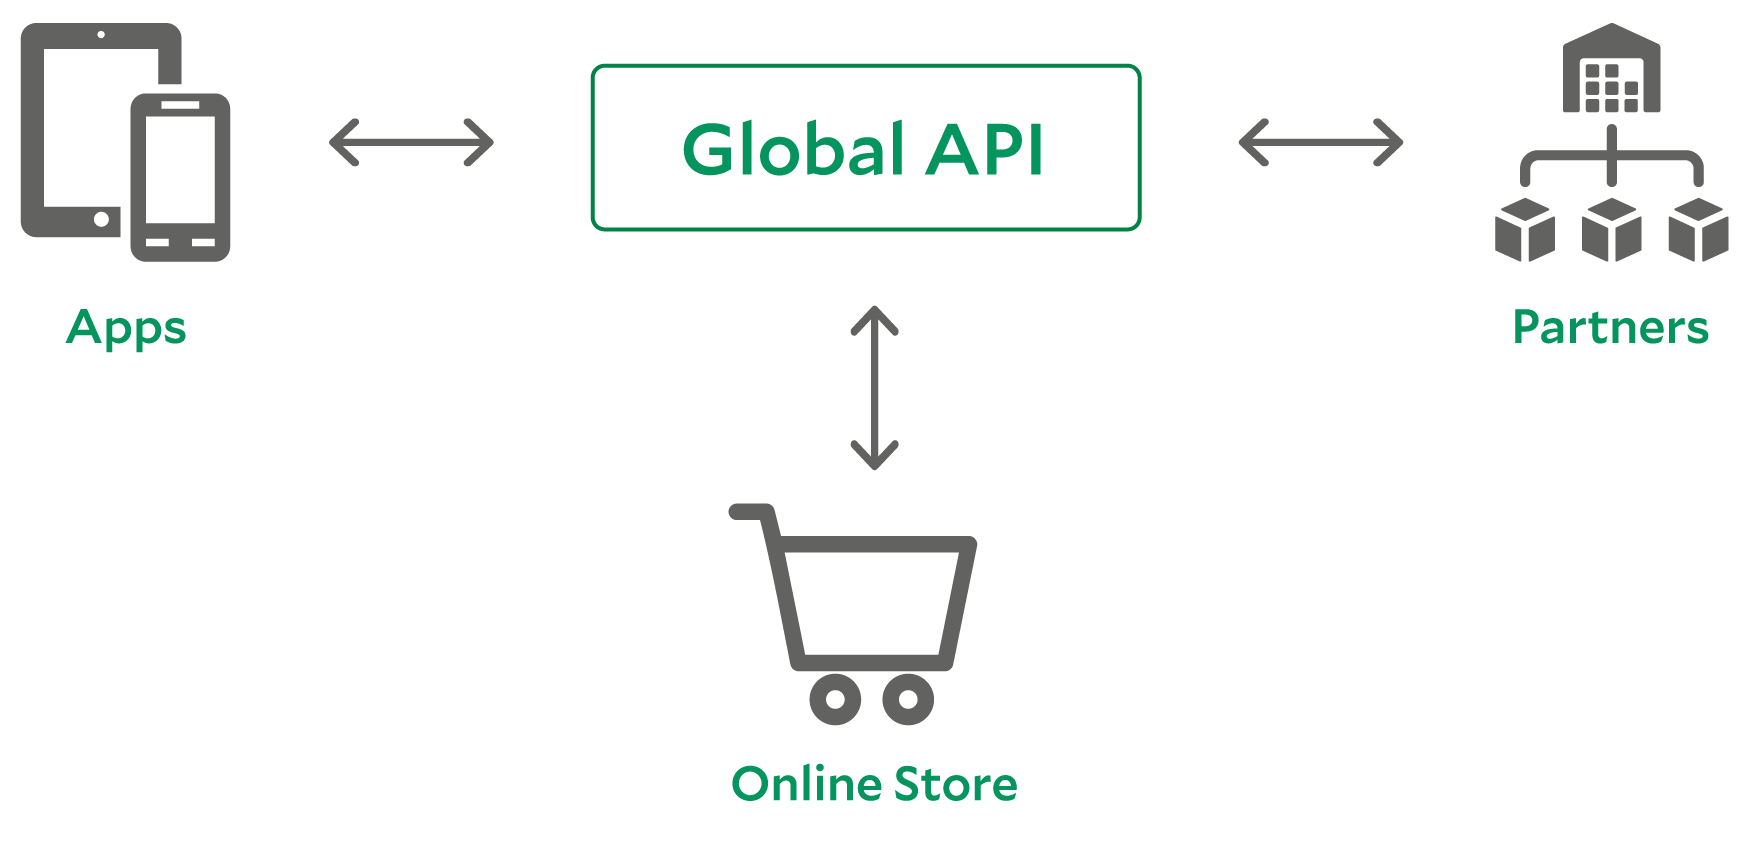 Samsung’s global API provides the backbone of a true omnichannel experience for customers